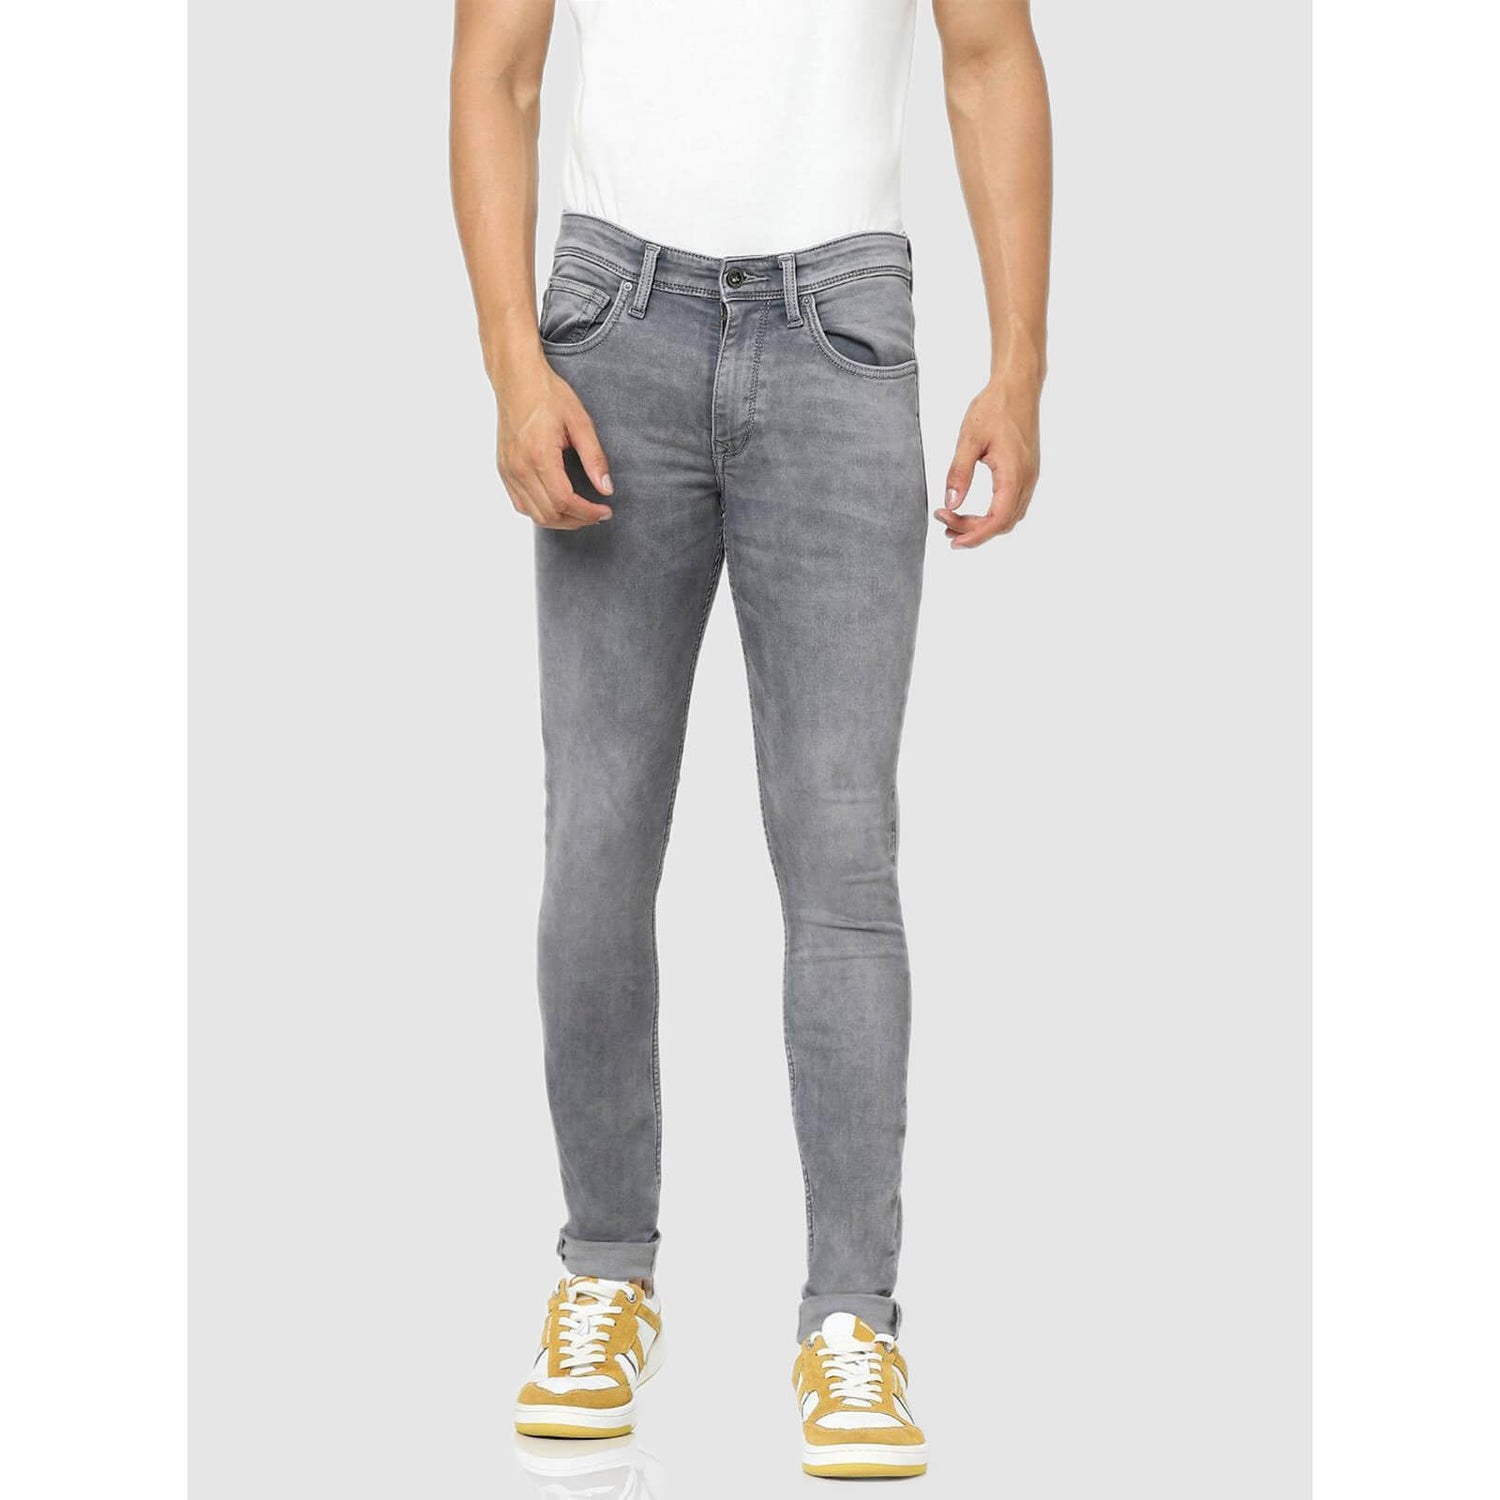 Light Grey Solid Ankle-Length Casual Men Regular Fit Jeans - Selling Fast  at Pantaloons.com